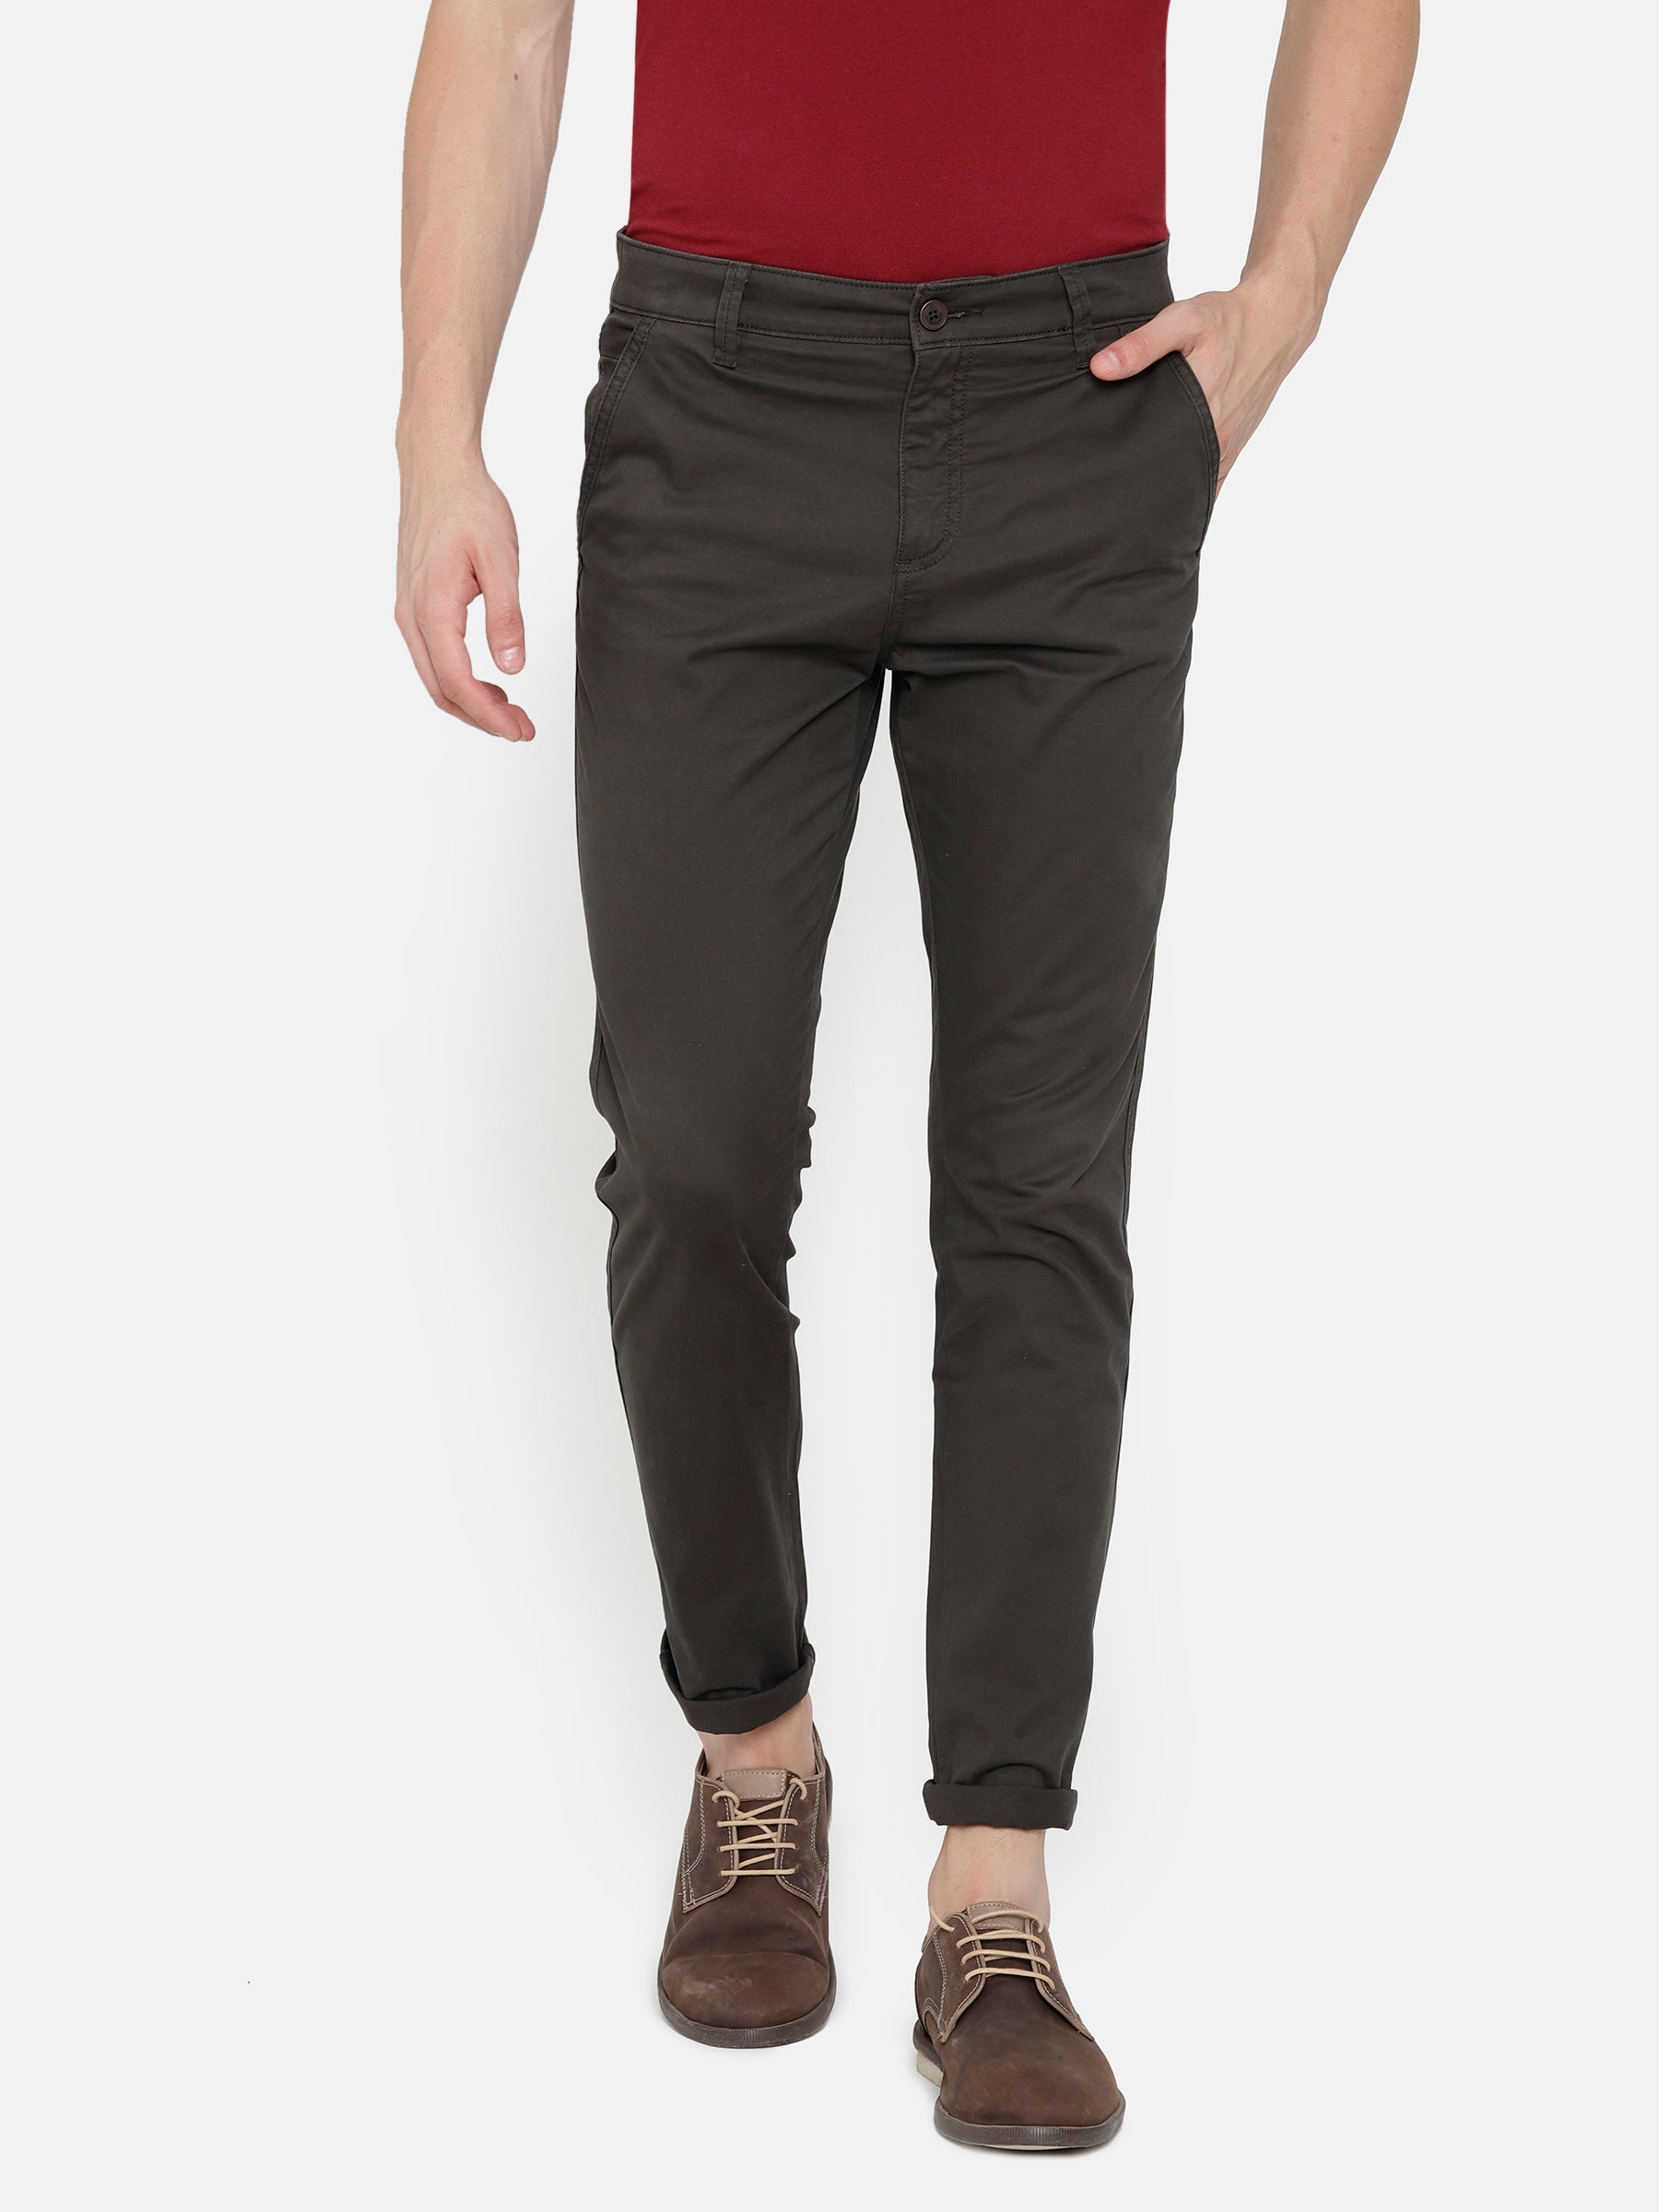 Mens Grey Trousers Manufacturer,Exporter,Supplier from Faridabad,India